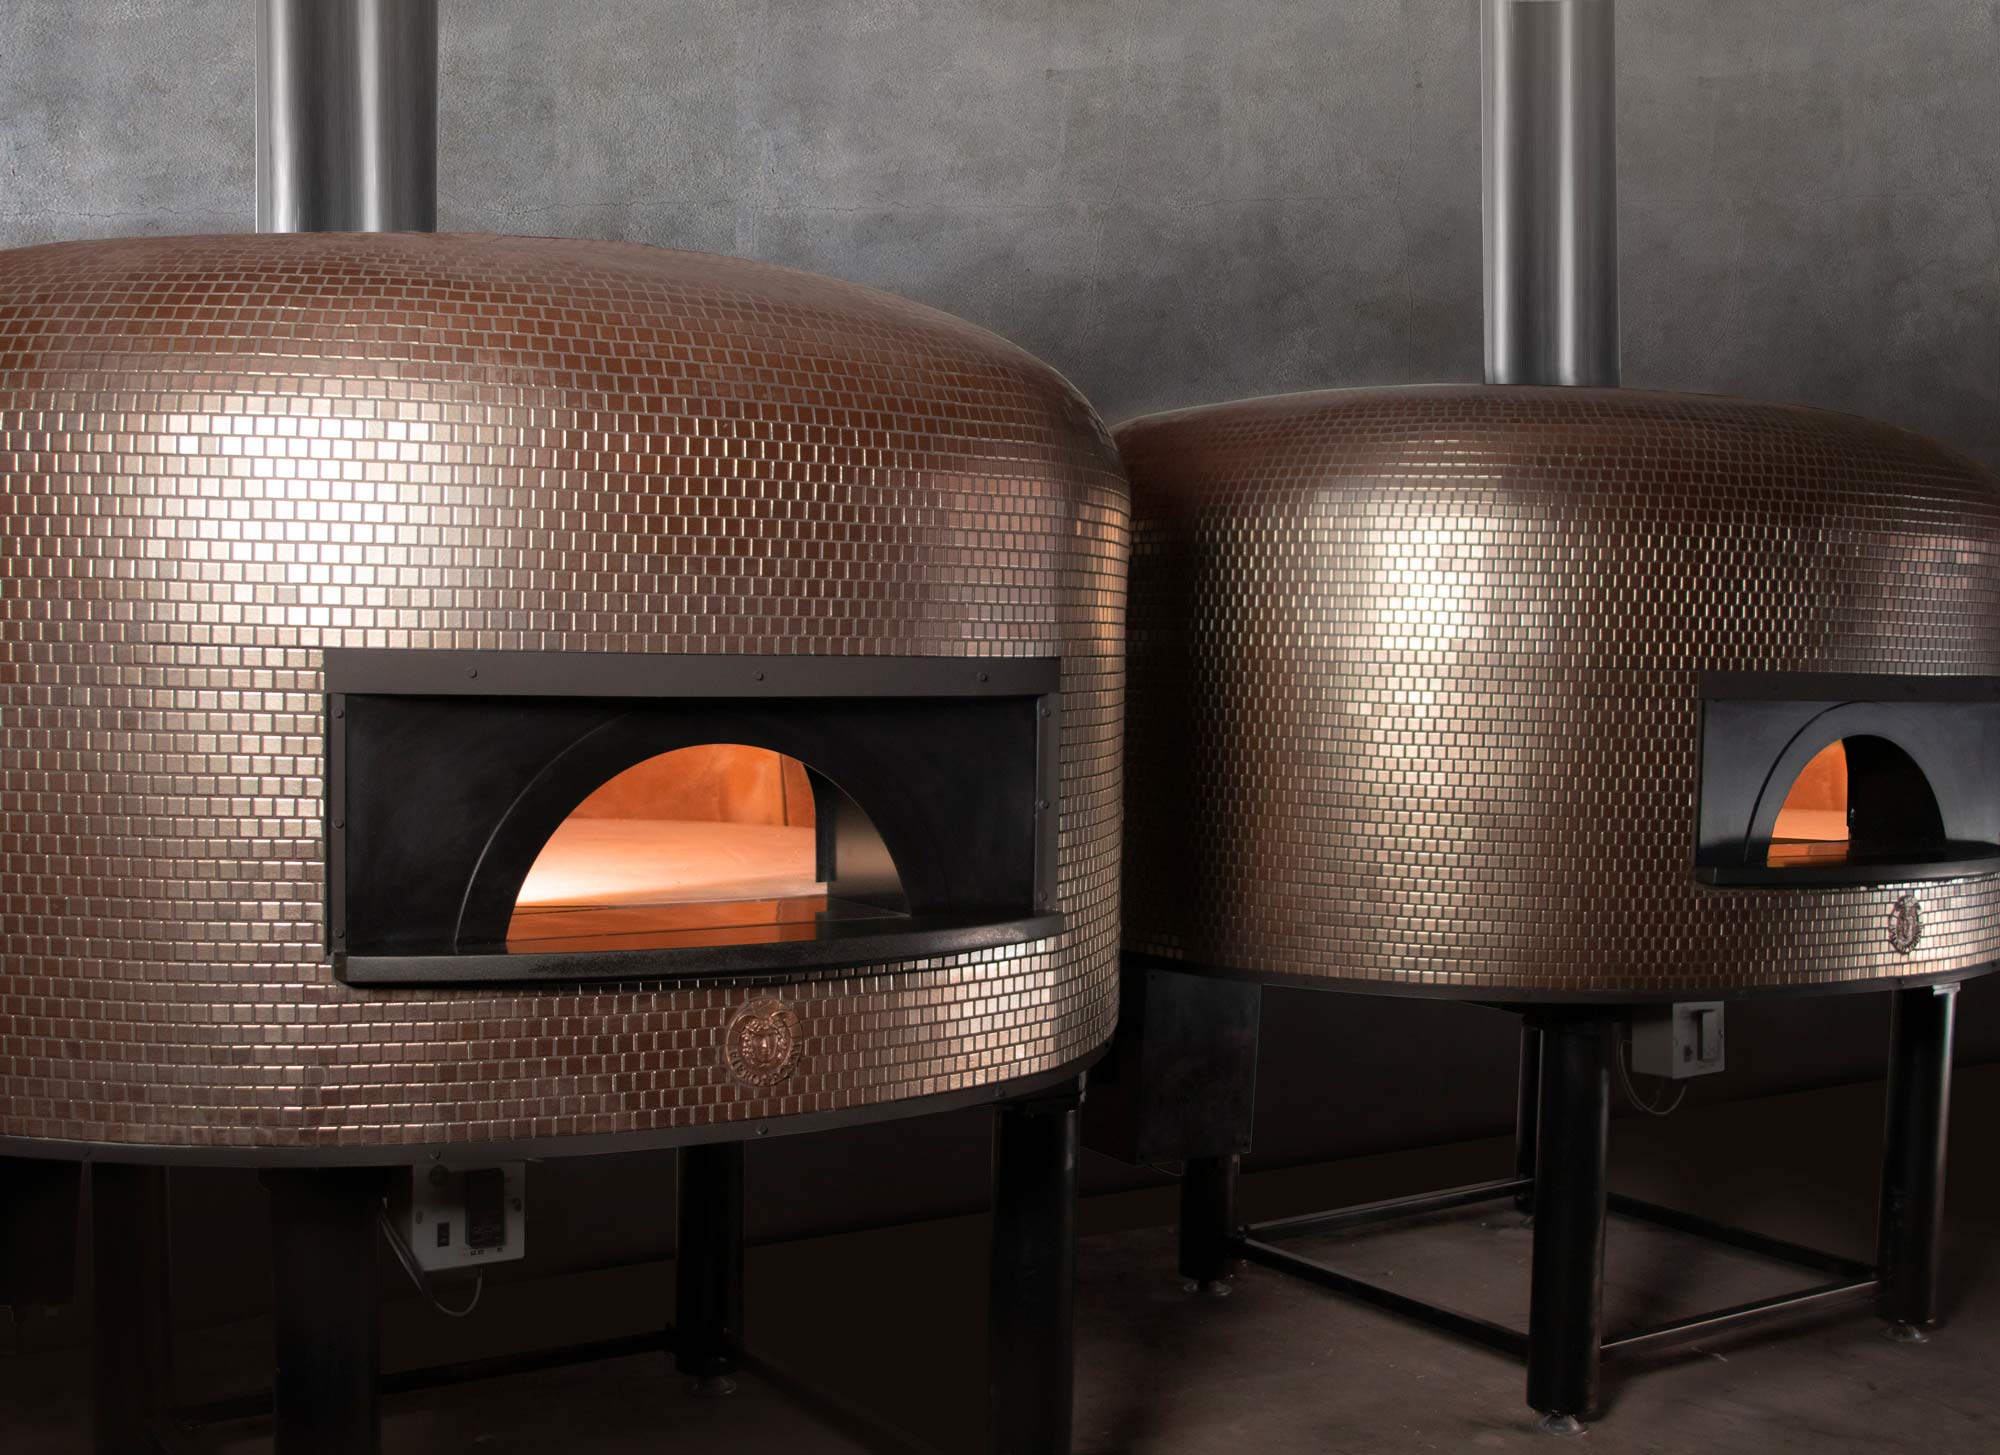 Commercial Rotating Pizza Ovens from the Fiero Forni Foodservice Equipment Line